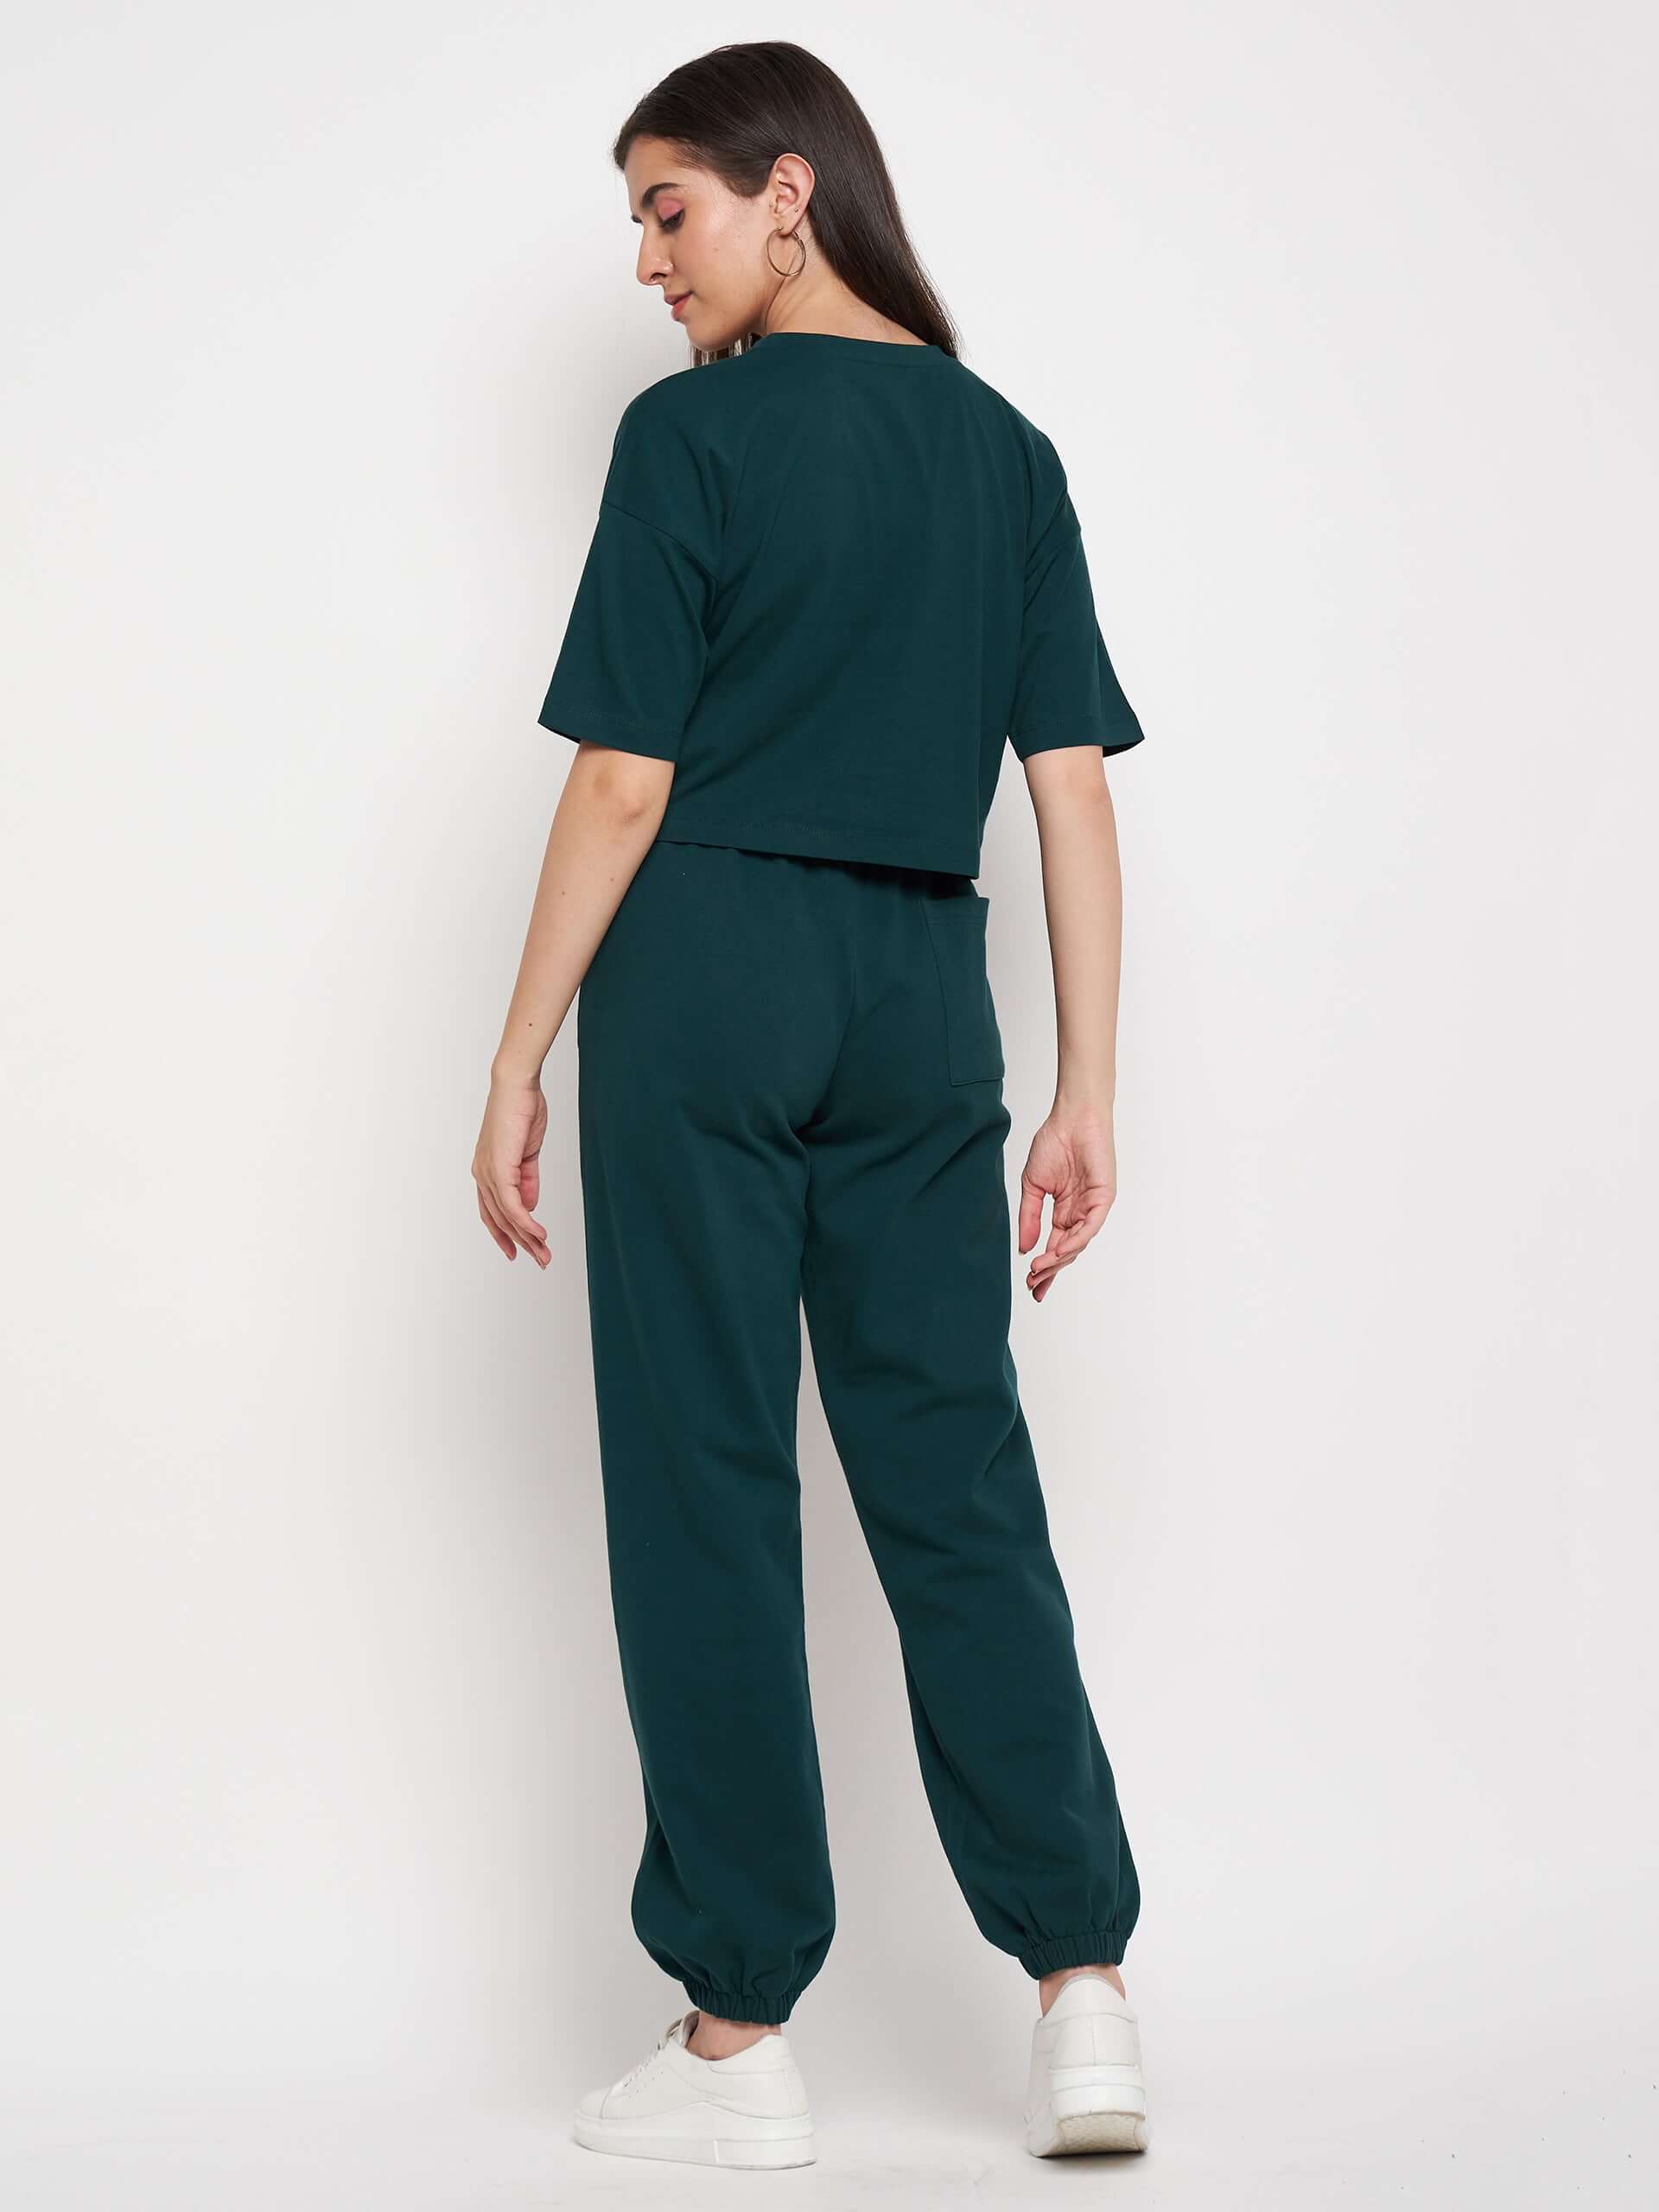 Solid Tracksuit Co-ord Set for Women - Antimony